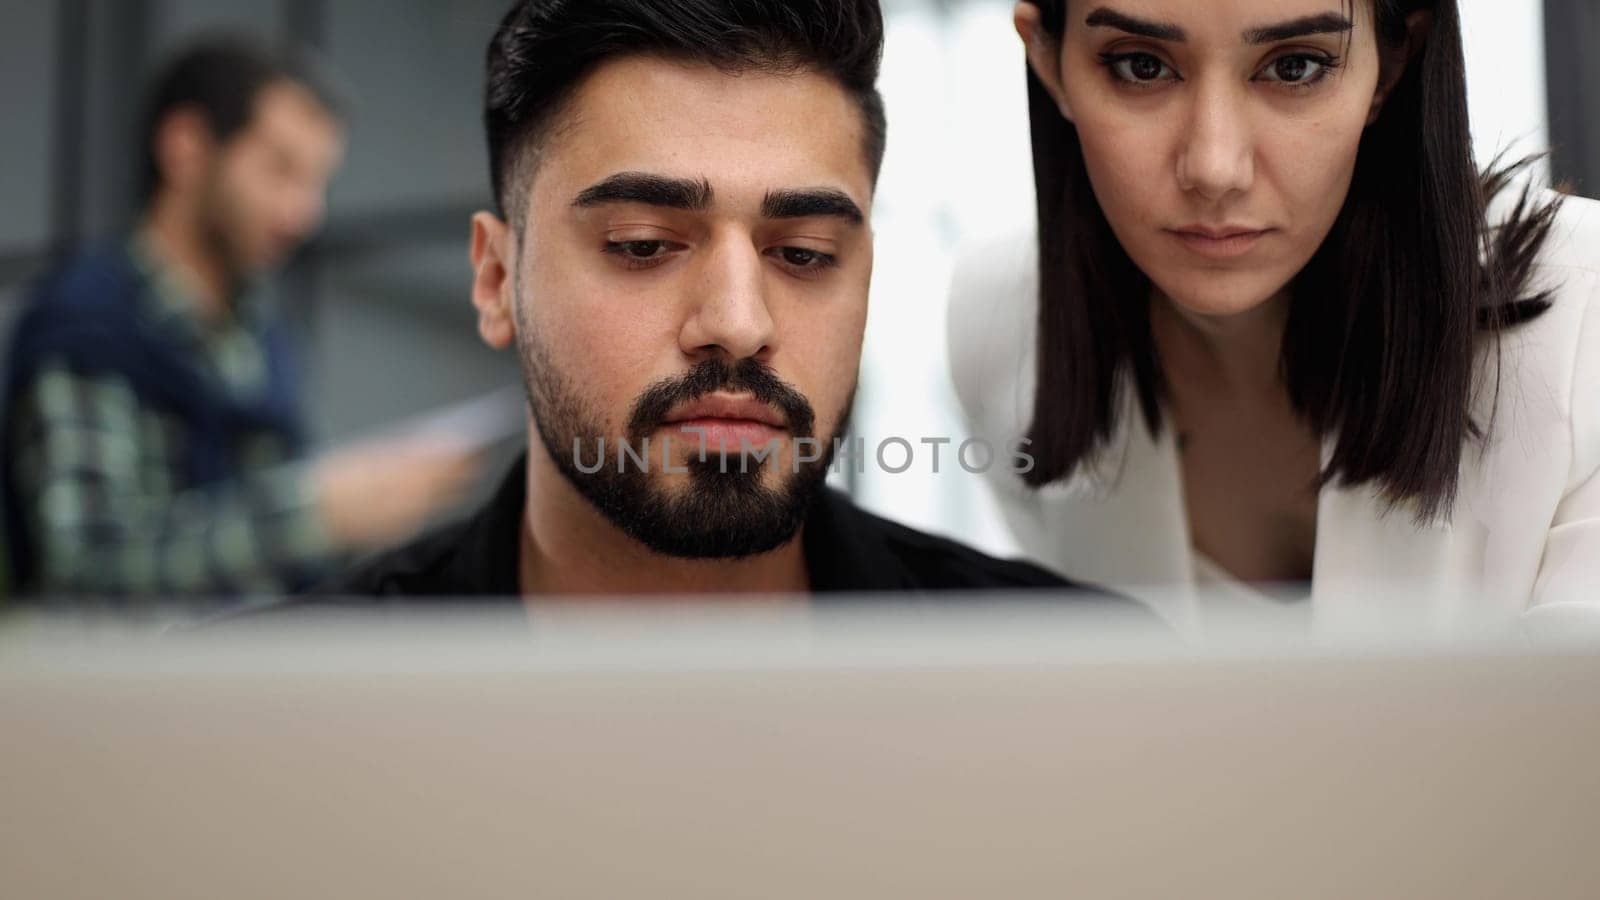 Seriously focused determined young bearded businessman or freelancer sitting at the table,